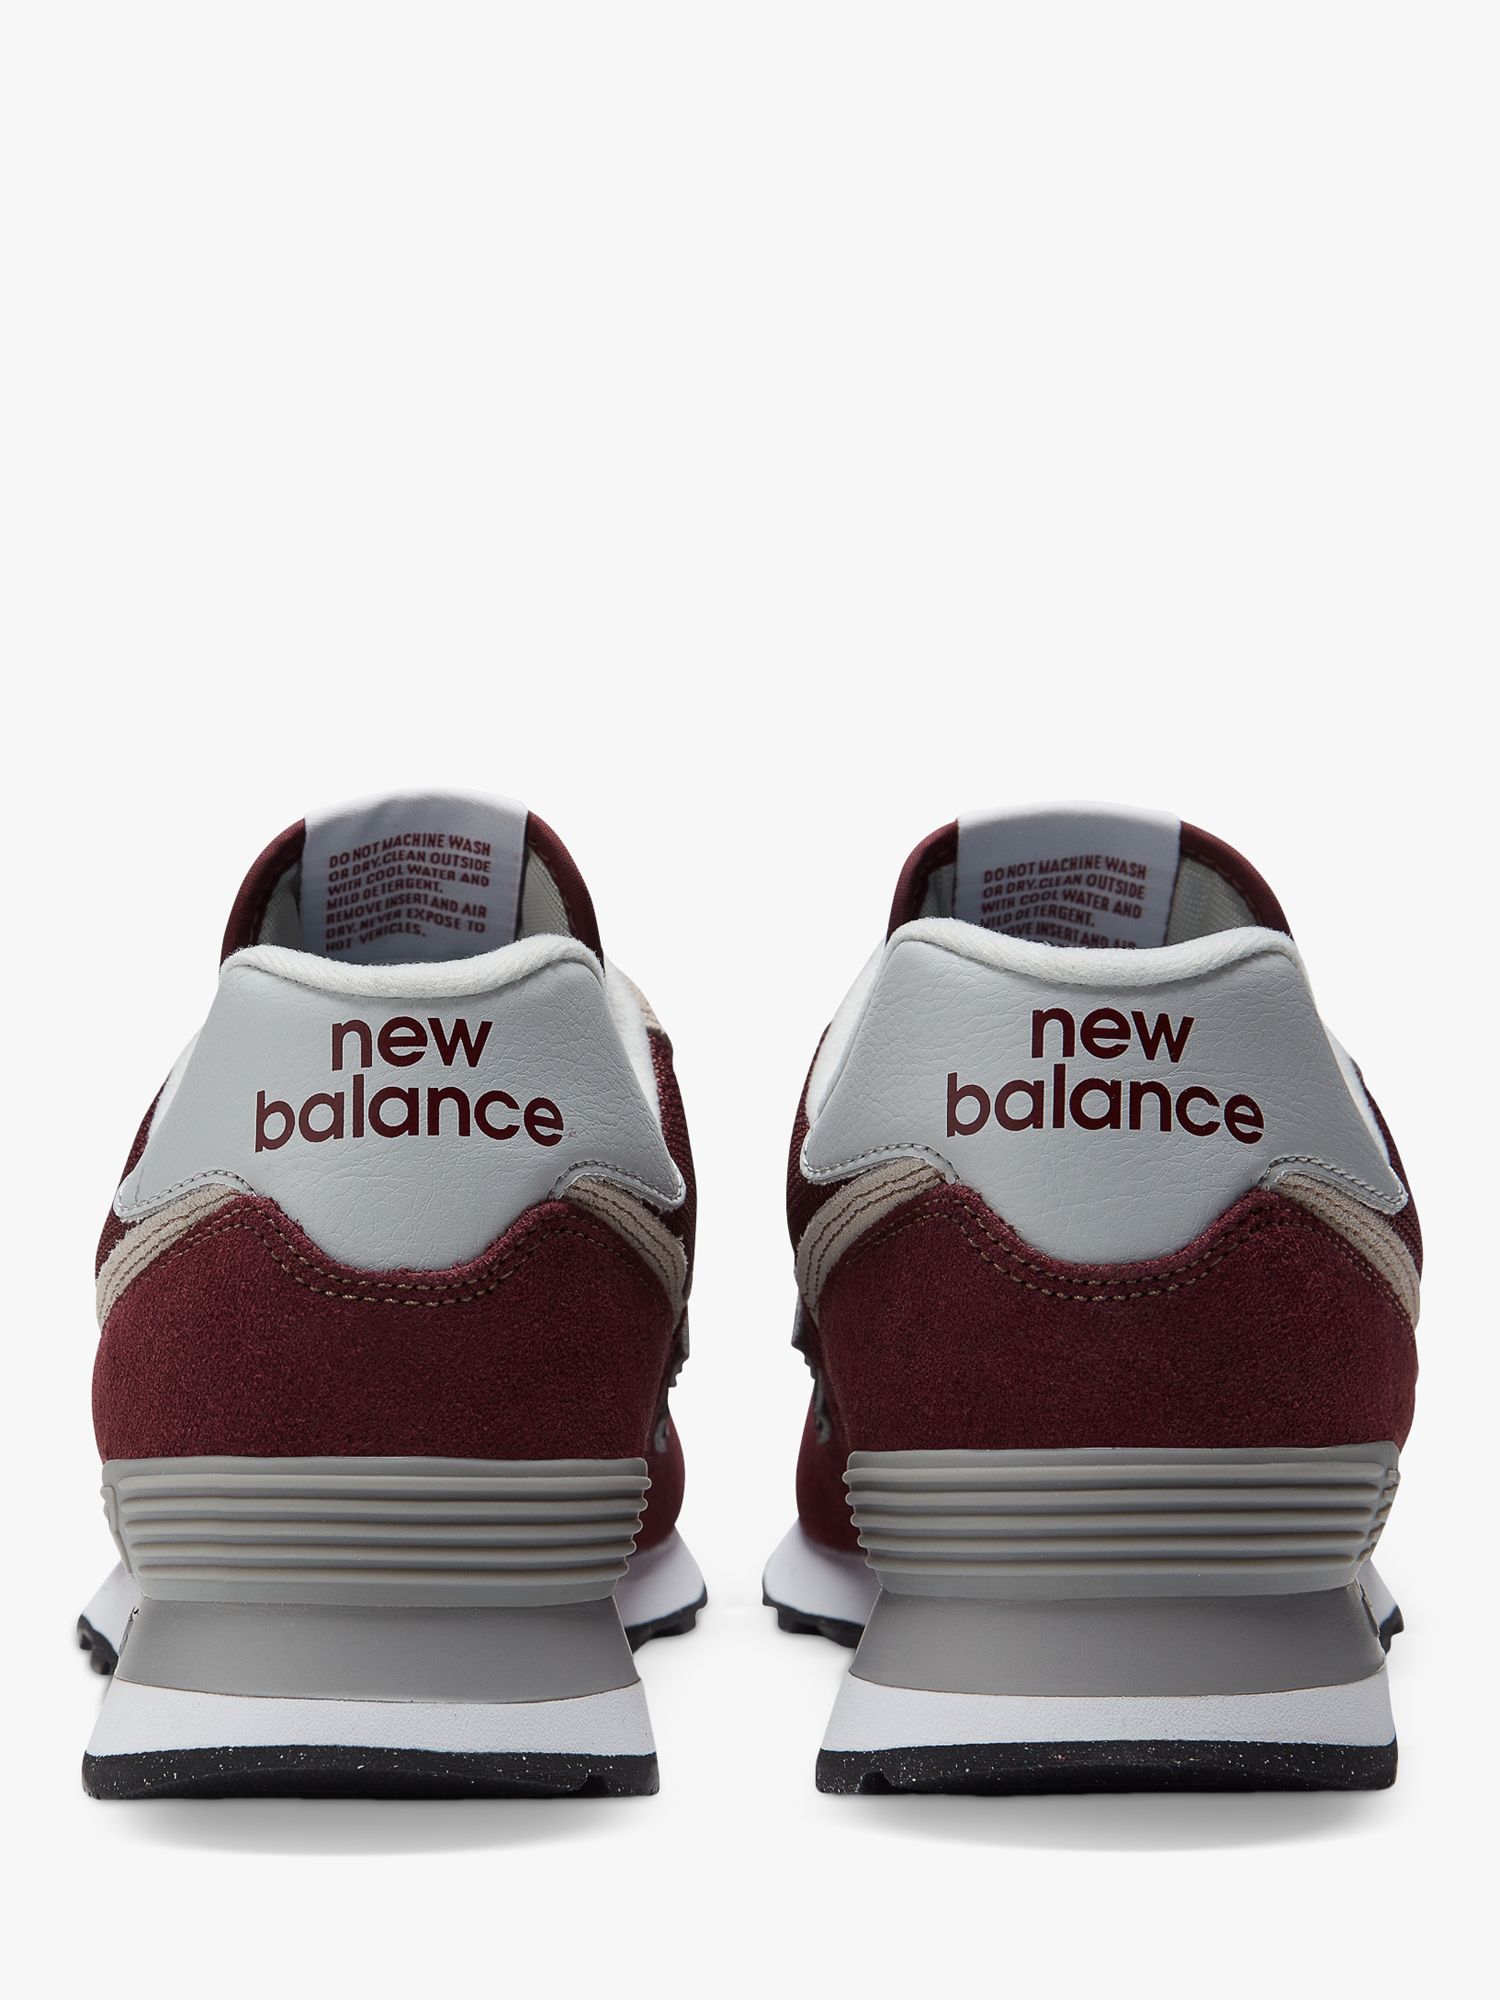 Cilios granja cerveza negra New Balance 574 Suede Trainers, Red at John Lewis & Partners